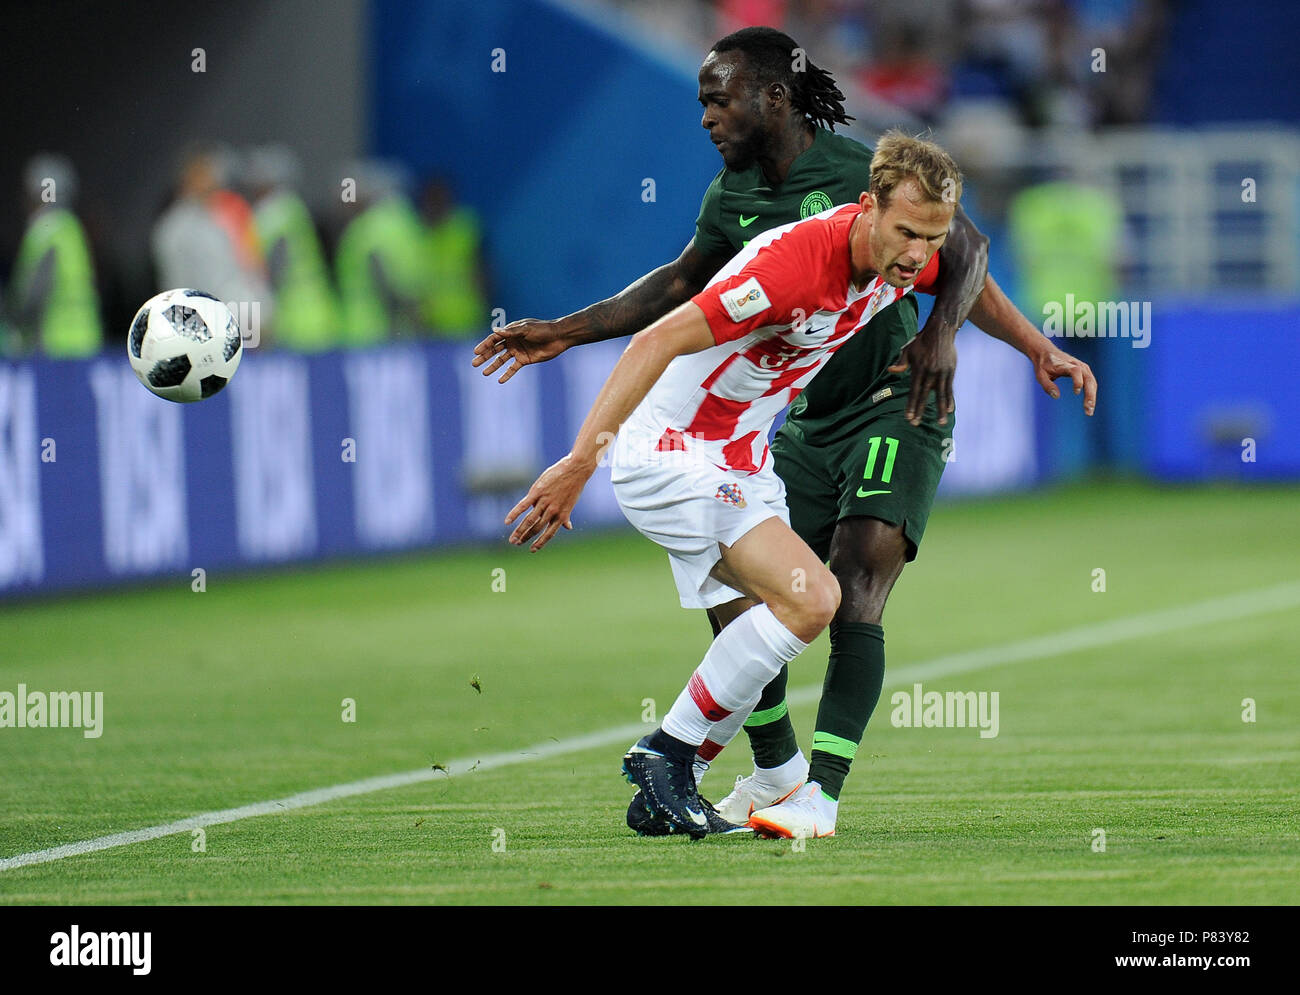 KALININGRAD, RUSSIA - JUNE 16: Ivan Strinic of Croatia competes with Victor Moses of Nigeria during the 2018 FIFA World Cup Russia group D match between Croatia and Nigeria at Kaliningrad Stadium on June 16, 2018 in Kaliningrad, Russia. (Photo by Norbert Barczyk/PressFocus/MB Media) Stock Photo